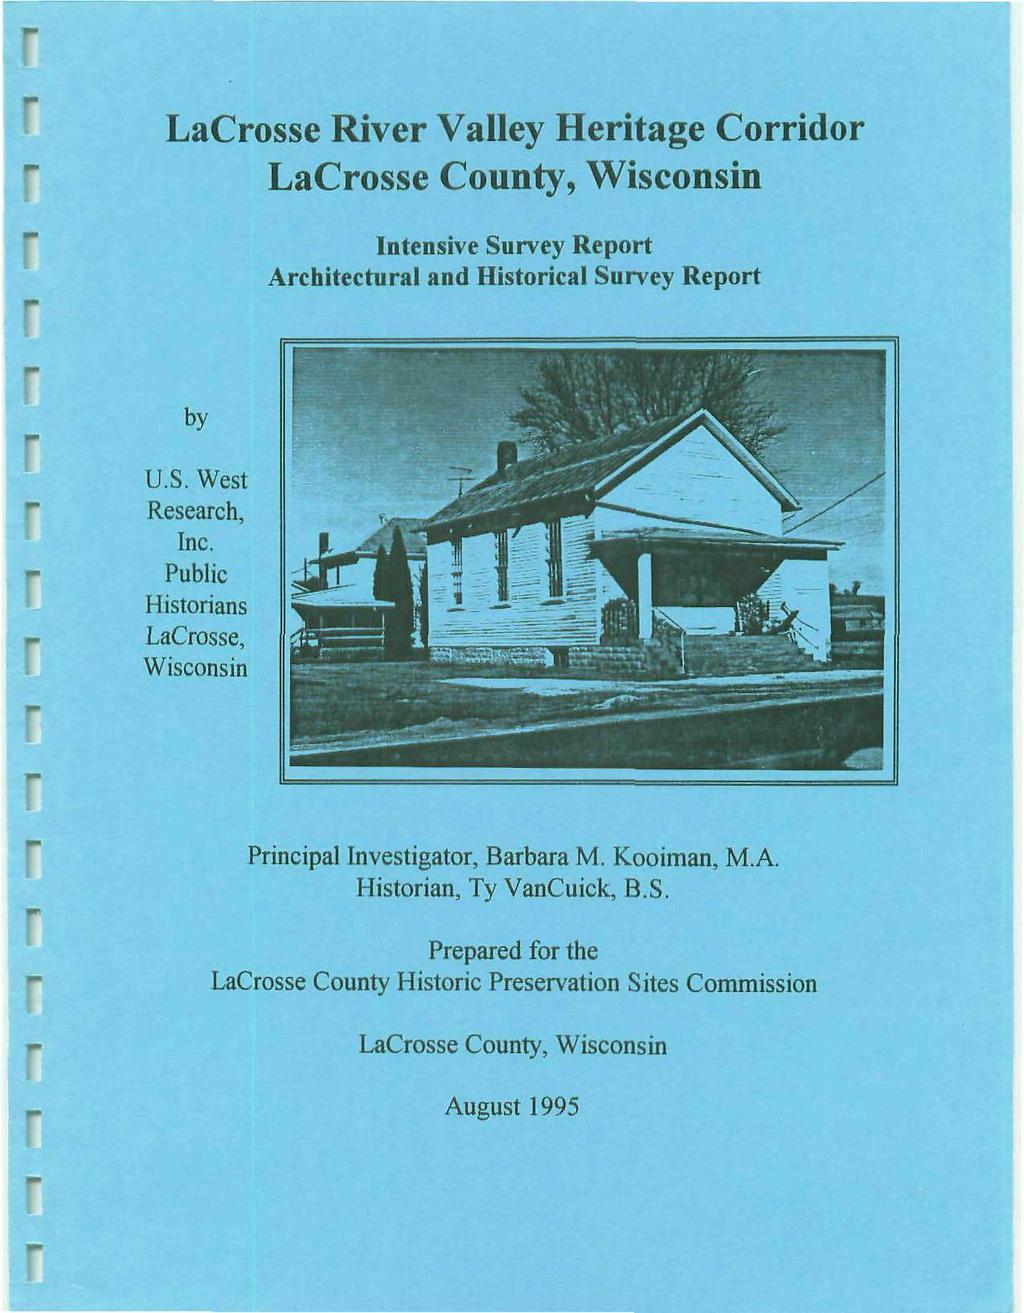 LaCosse Rive Valley Heitage Coido LaCosse County, Wisconsin Intensive Suvey Repot Achitectual and Histoical Suvey Repot Pincipal Investigato,